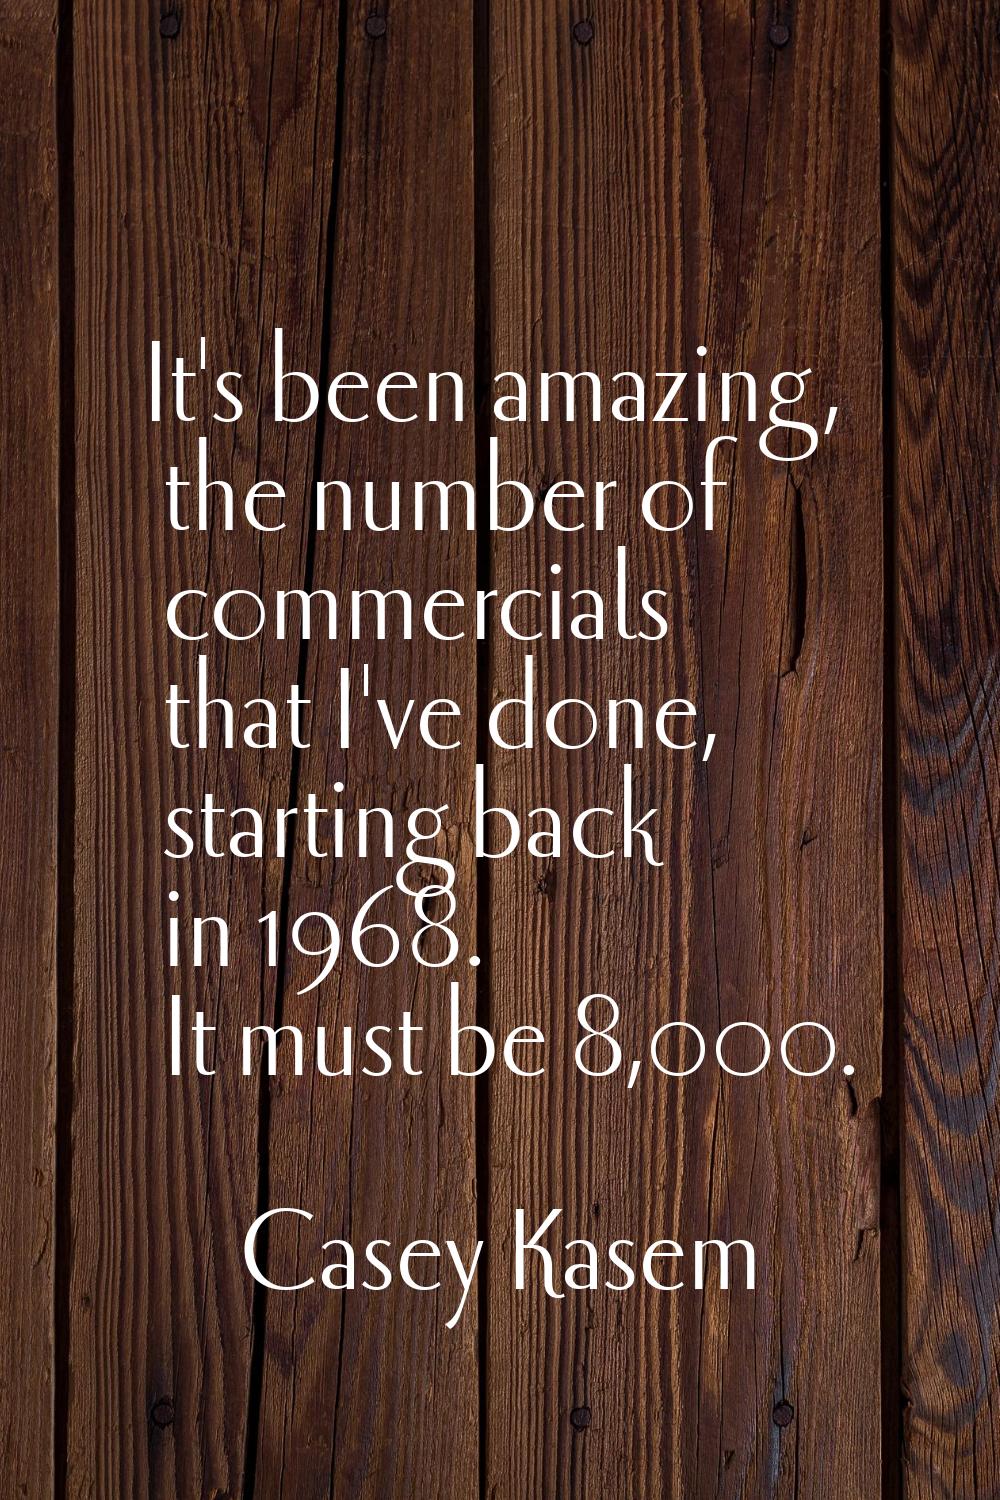 It's been amazing, the number of commercials that I've done, starting back in 1968. It must be 8,00